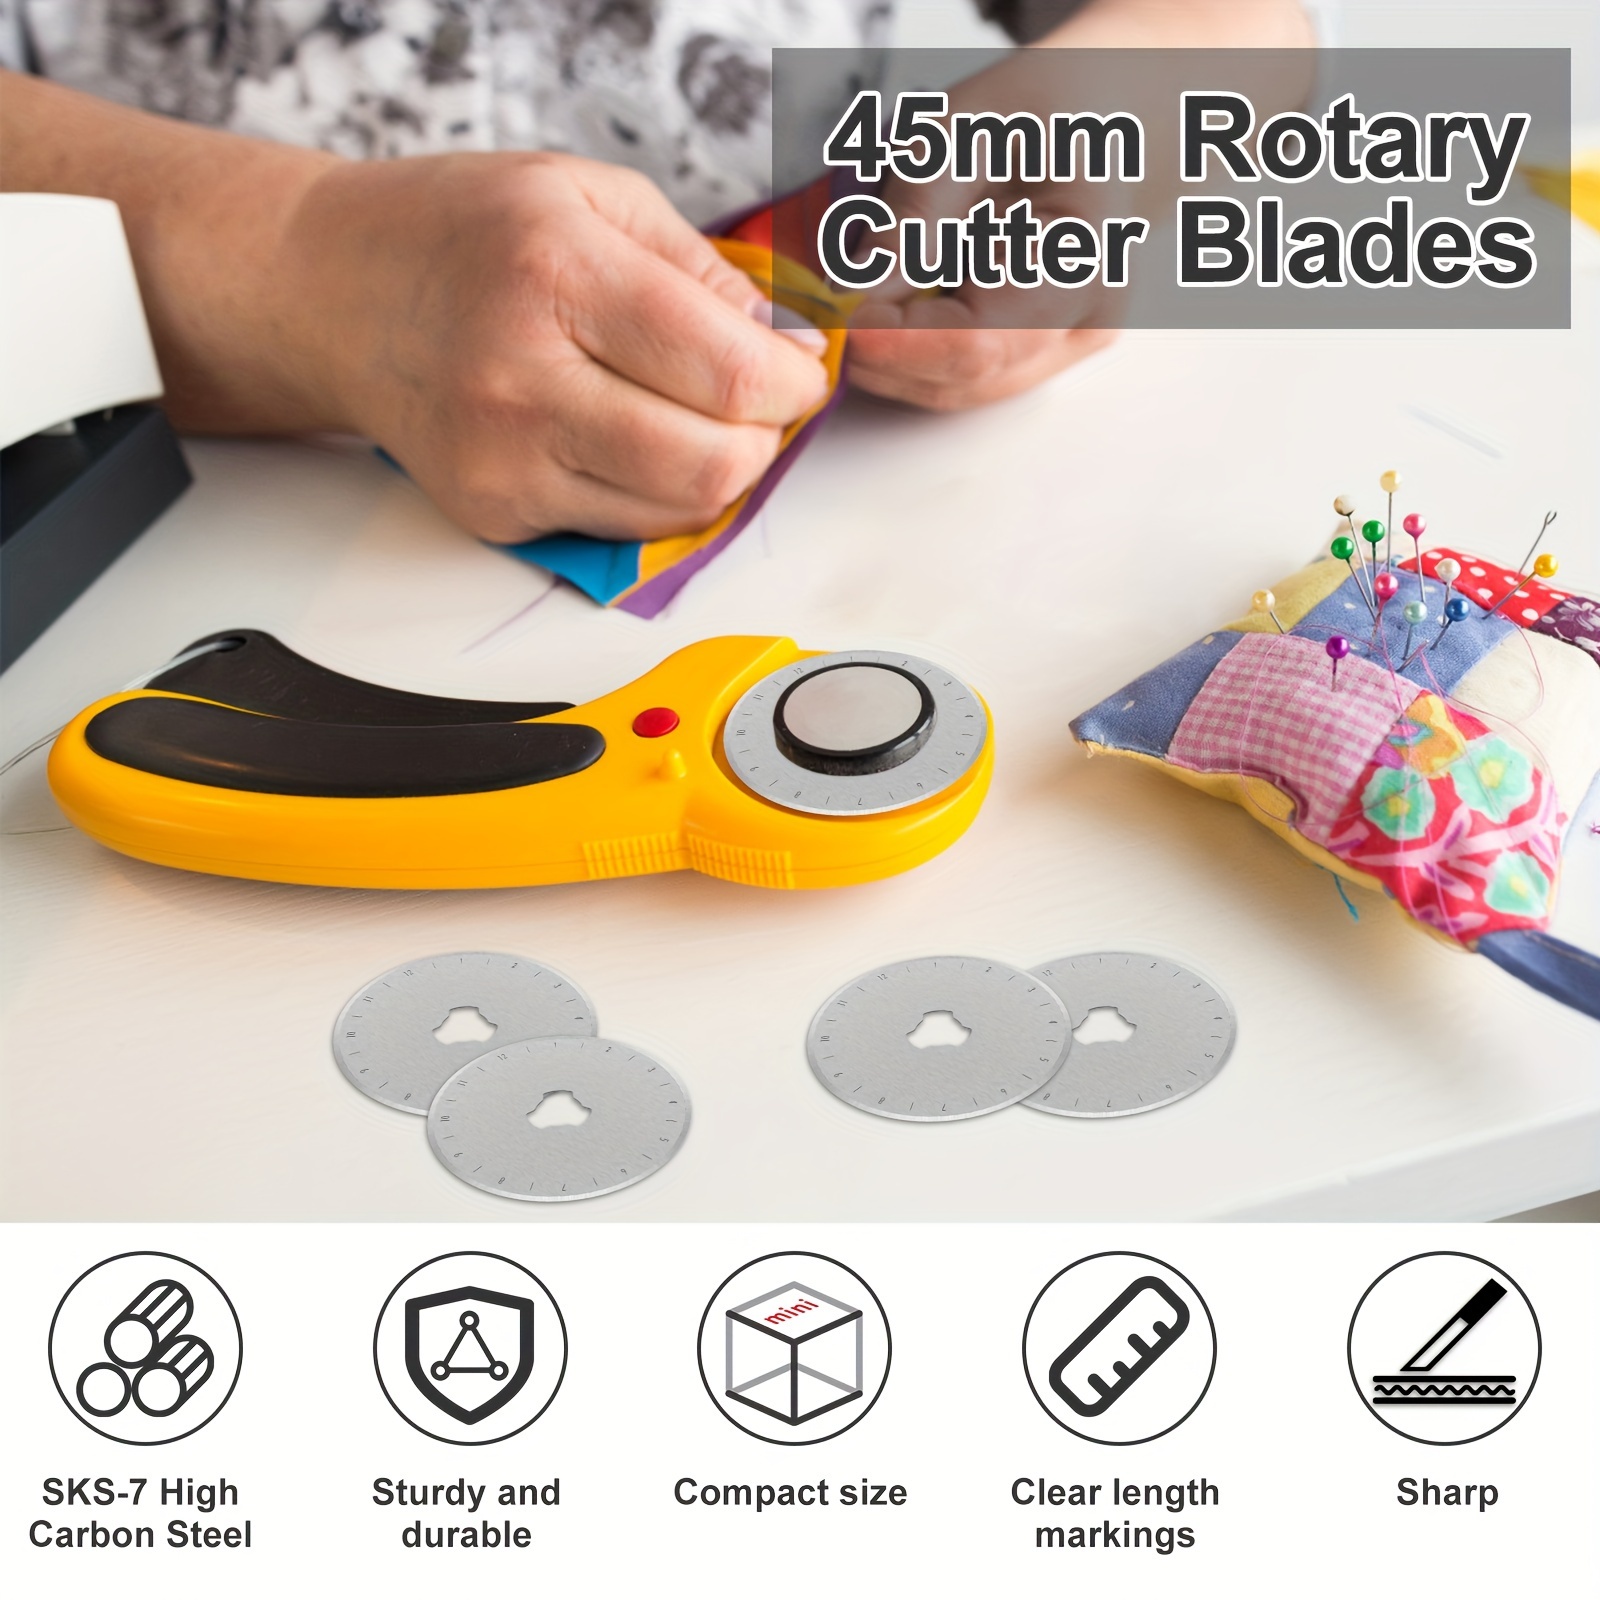 Titanium Rotary Cutter Blades 45mm Set 10/20/30/50pcs replacement Blades  leather Fabric Cutter SKS-7 Quilting Sewing Patchwork Tool – AUTOTOOLHOME